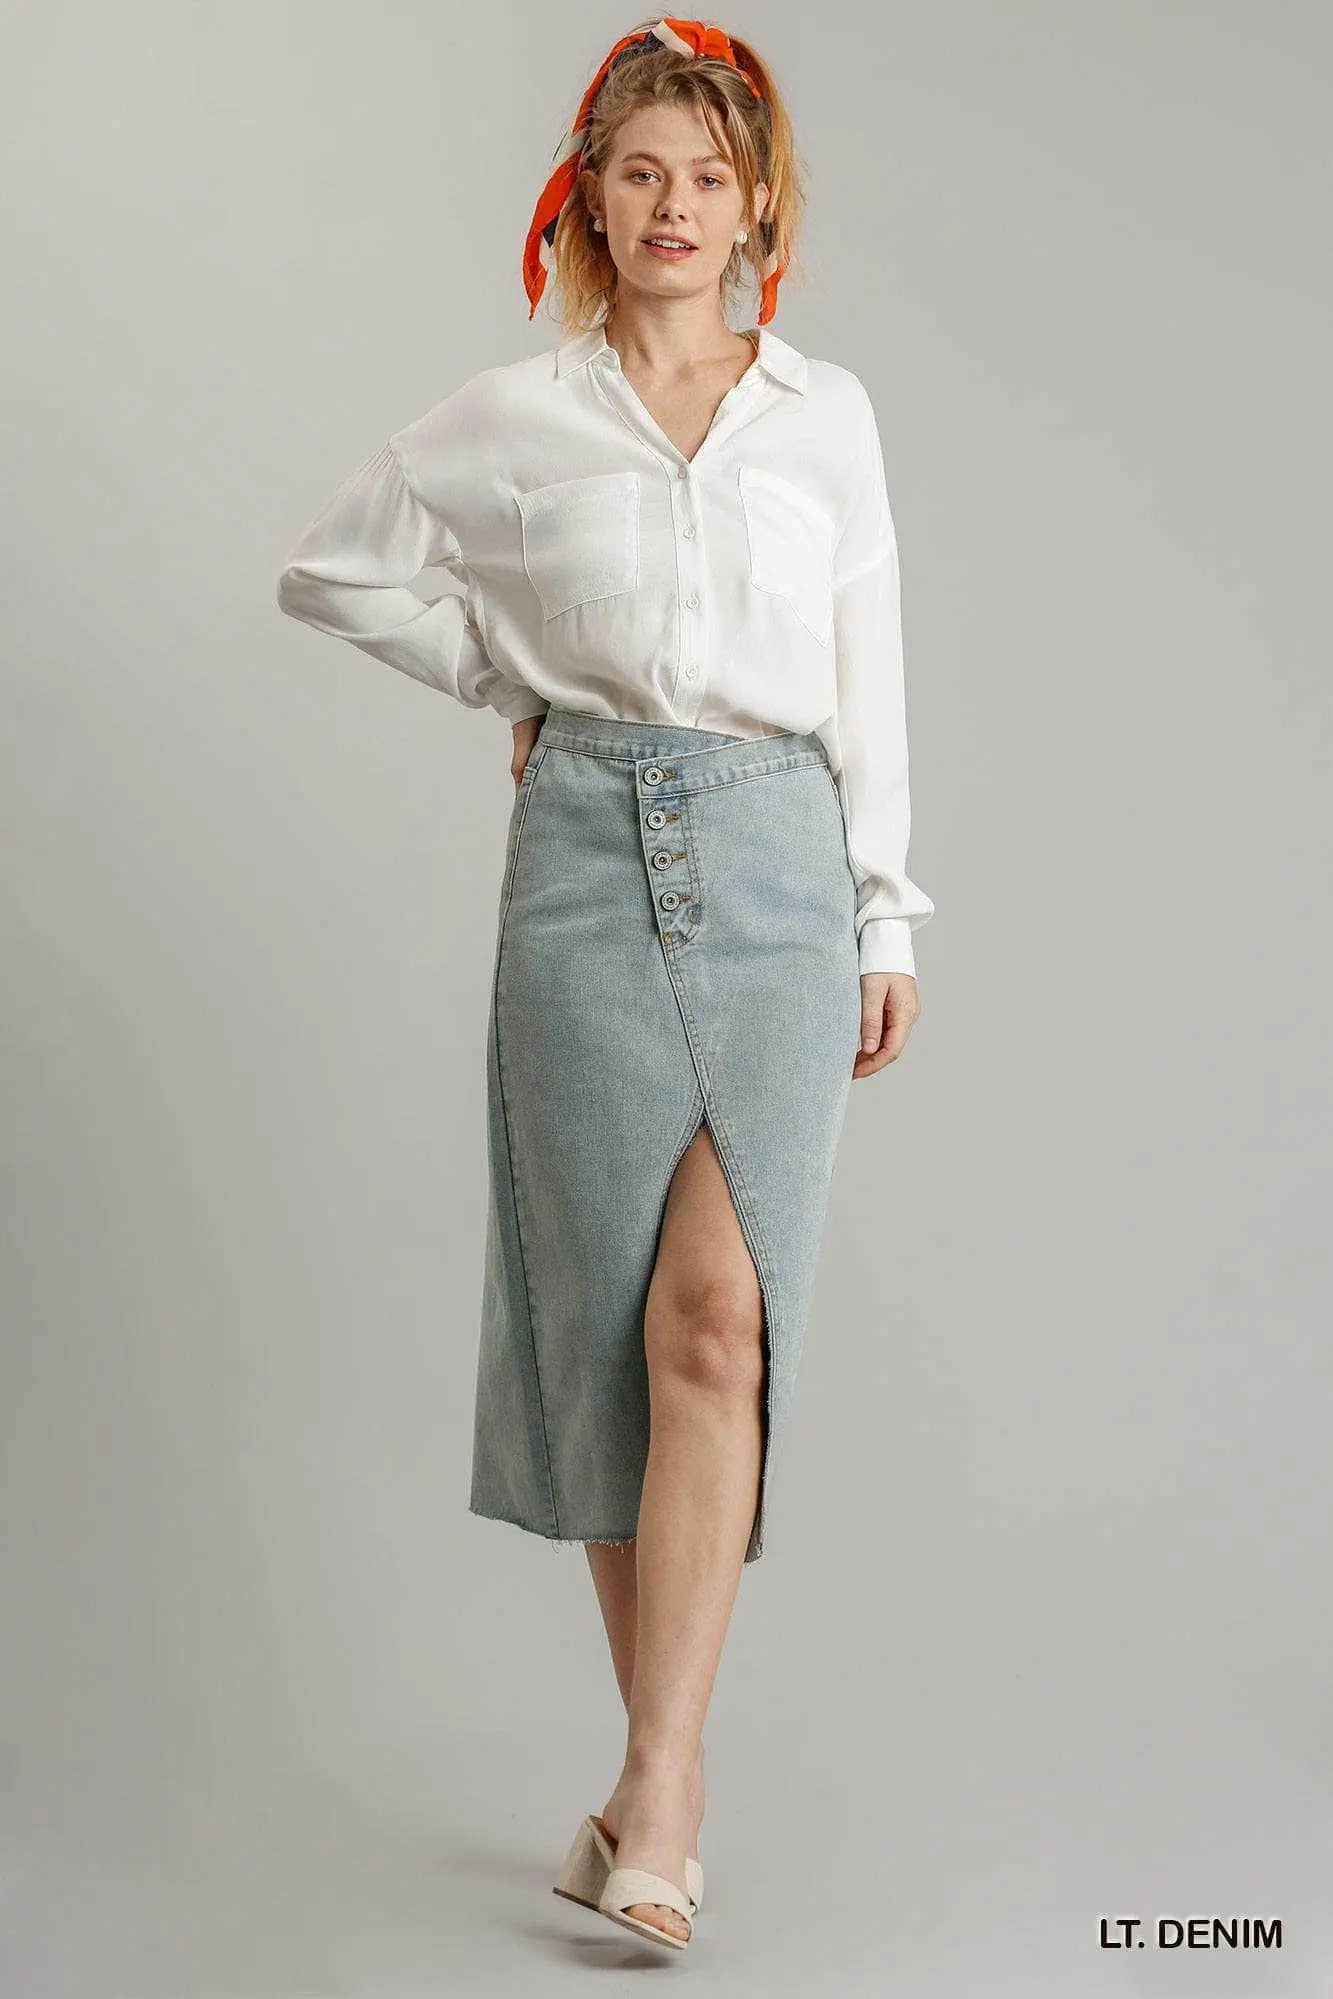 Asymmetrical Waist And Button Up Front Split Denim Skirt With Back Pockets And Unfinished Hem Blue Zone Planet